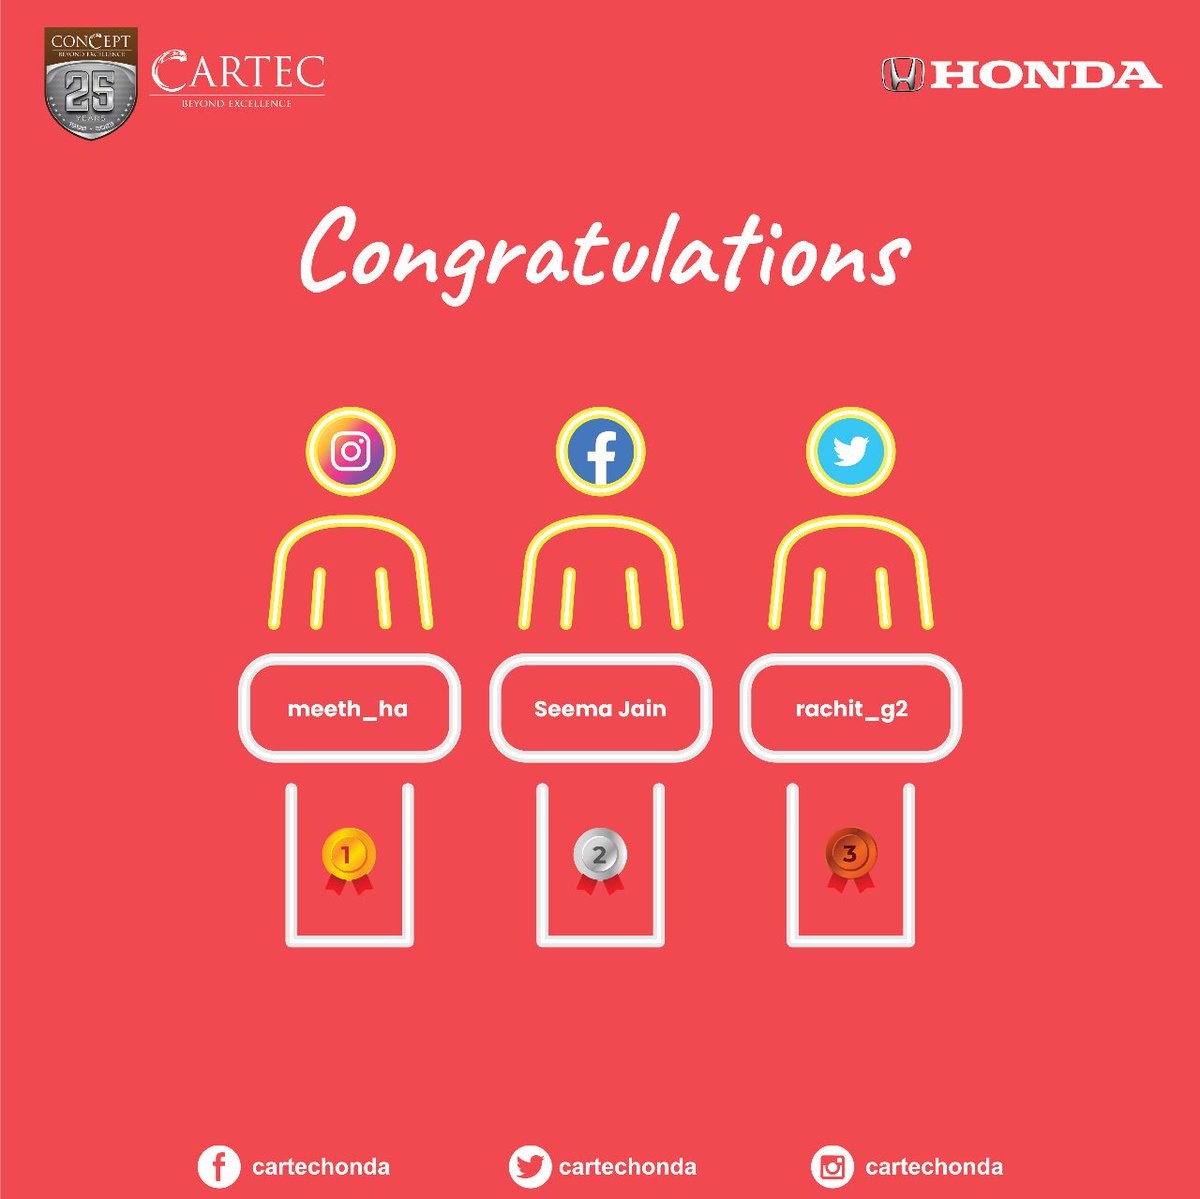 𝐇𝐞𝐫𝐞 𝐚𝐫𝐞 𝐭𝐡𝐞 𝐥𝐮𝐜𝐤𝐲 𝐐𝐮𝐢𝐳 𝐰𝐢𝐧𝐧𝐞𝐫𝐬.
A big congratulations to all winners of the Quiz competition.

.
#CartecHonda #ConceptGroup #BeyondExcellence #HondaCarDealer #Honda #Hondalndia #QuizTime #quizcompetition #GuessTheCar #quiz #ExcitingPrizes